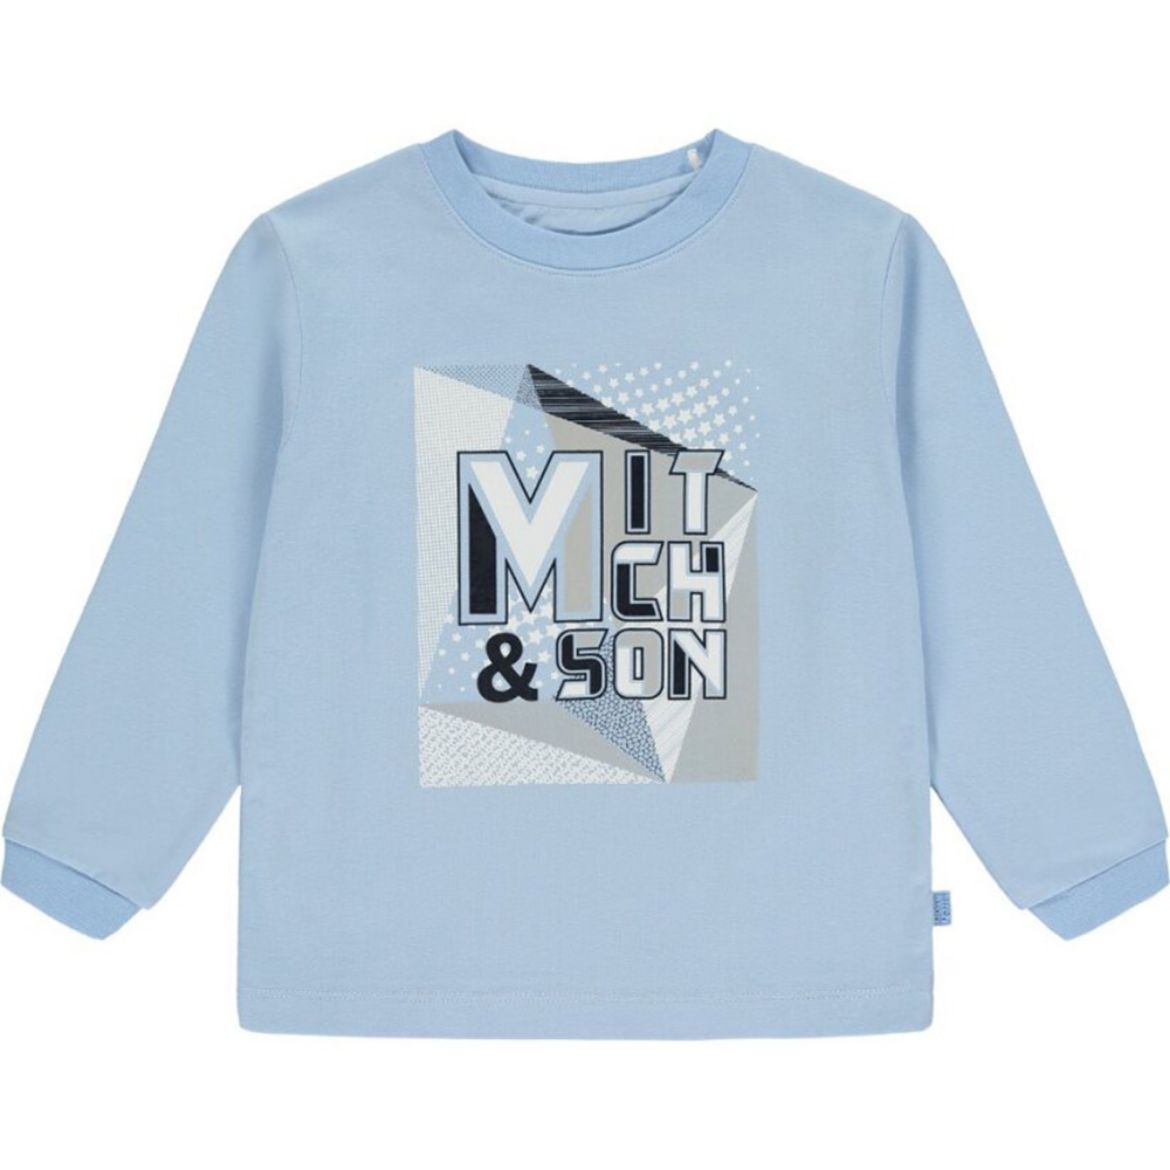 Picture of Mitch & Son Boys 'Presley' Blue Top